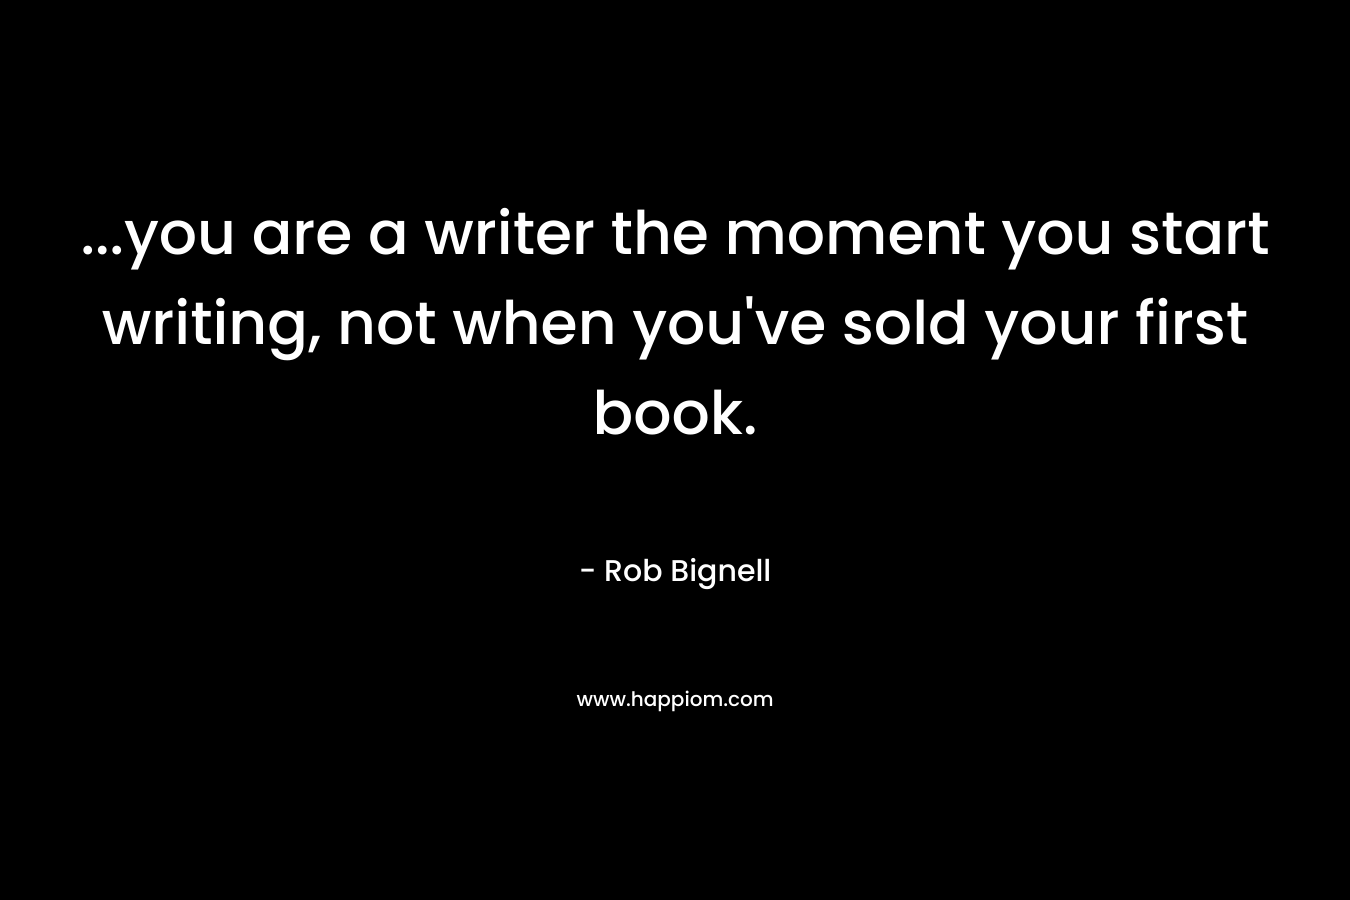 …you are a writer the moment you start writing, not when you’ve sold your first book. – Rob Bignell